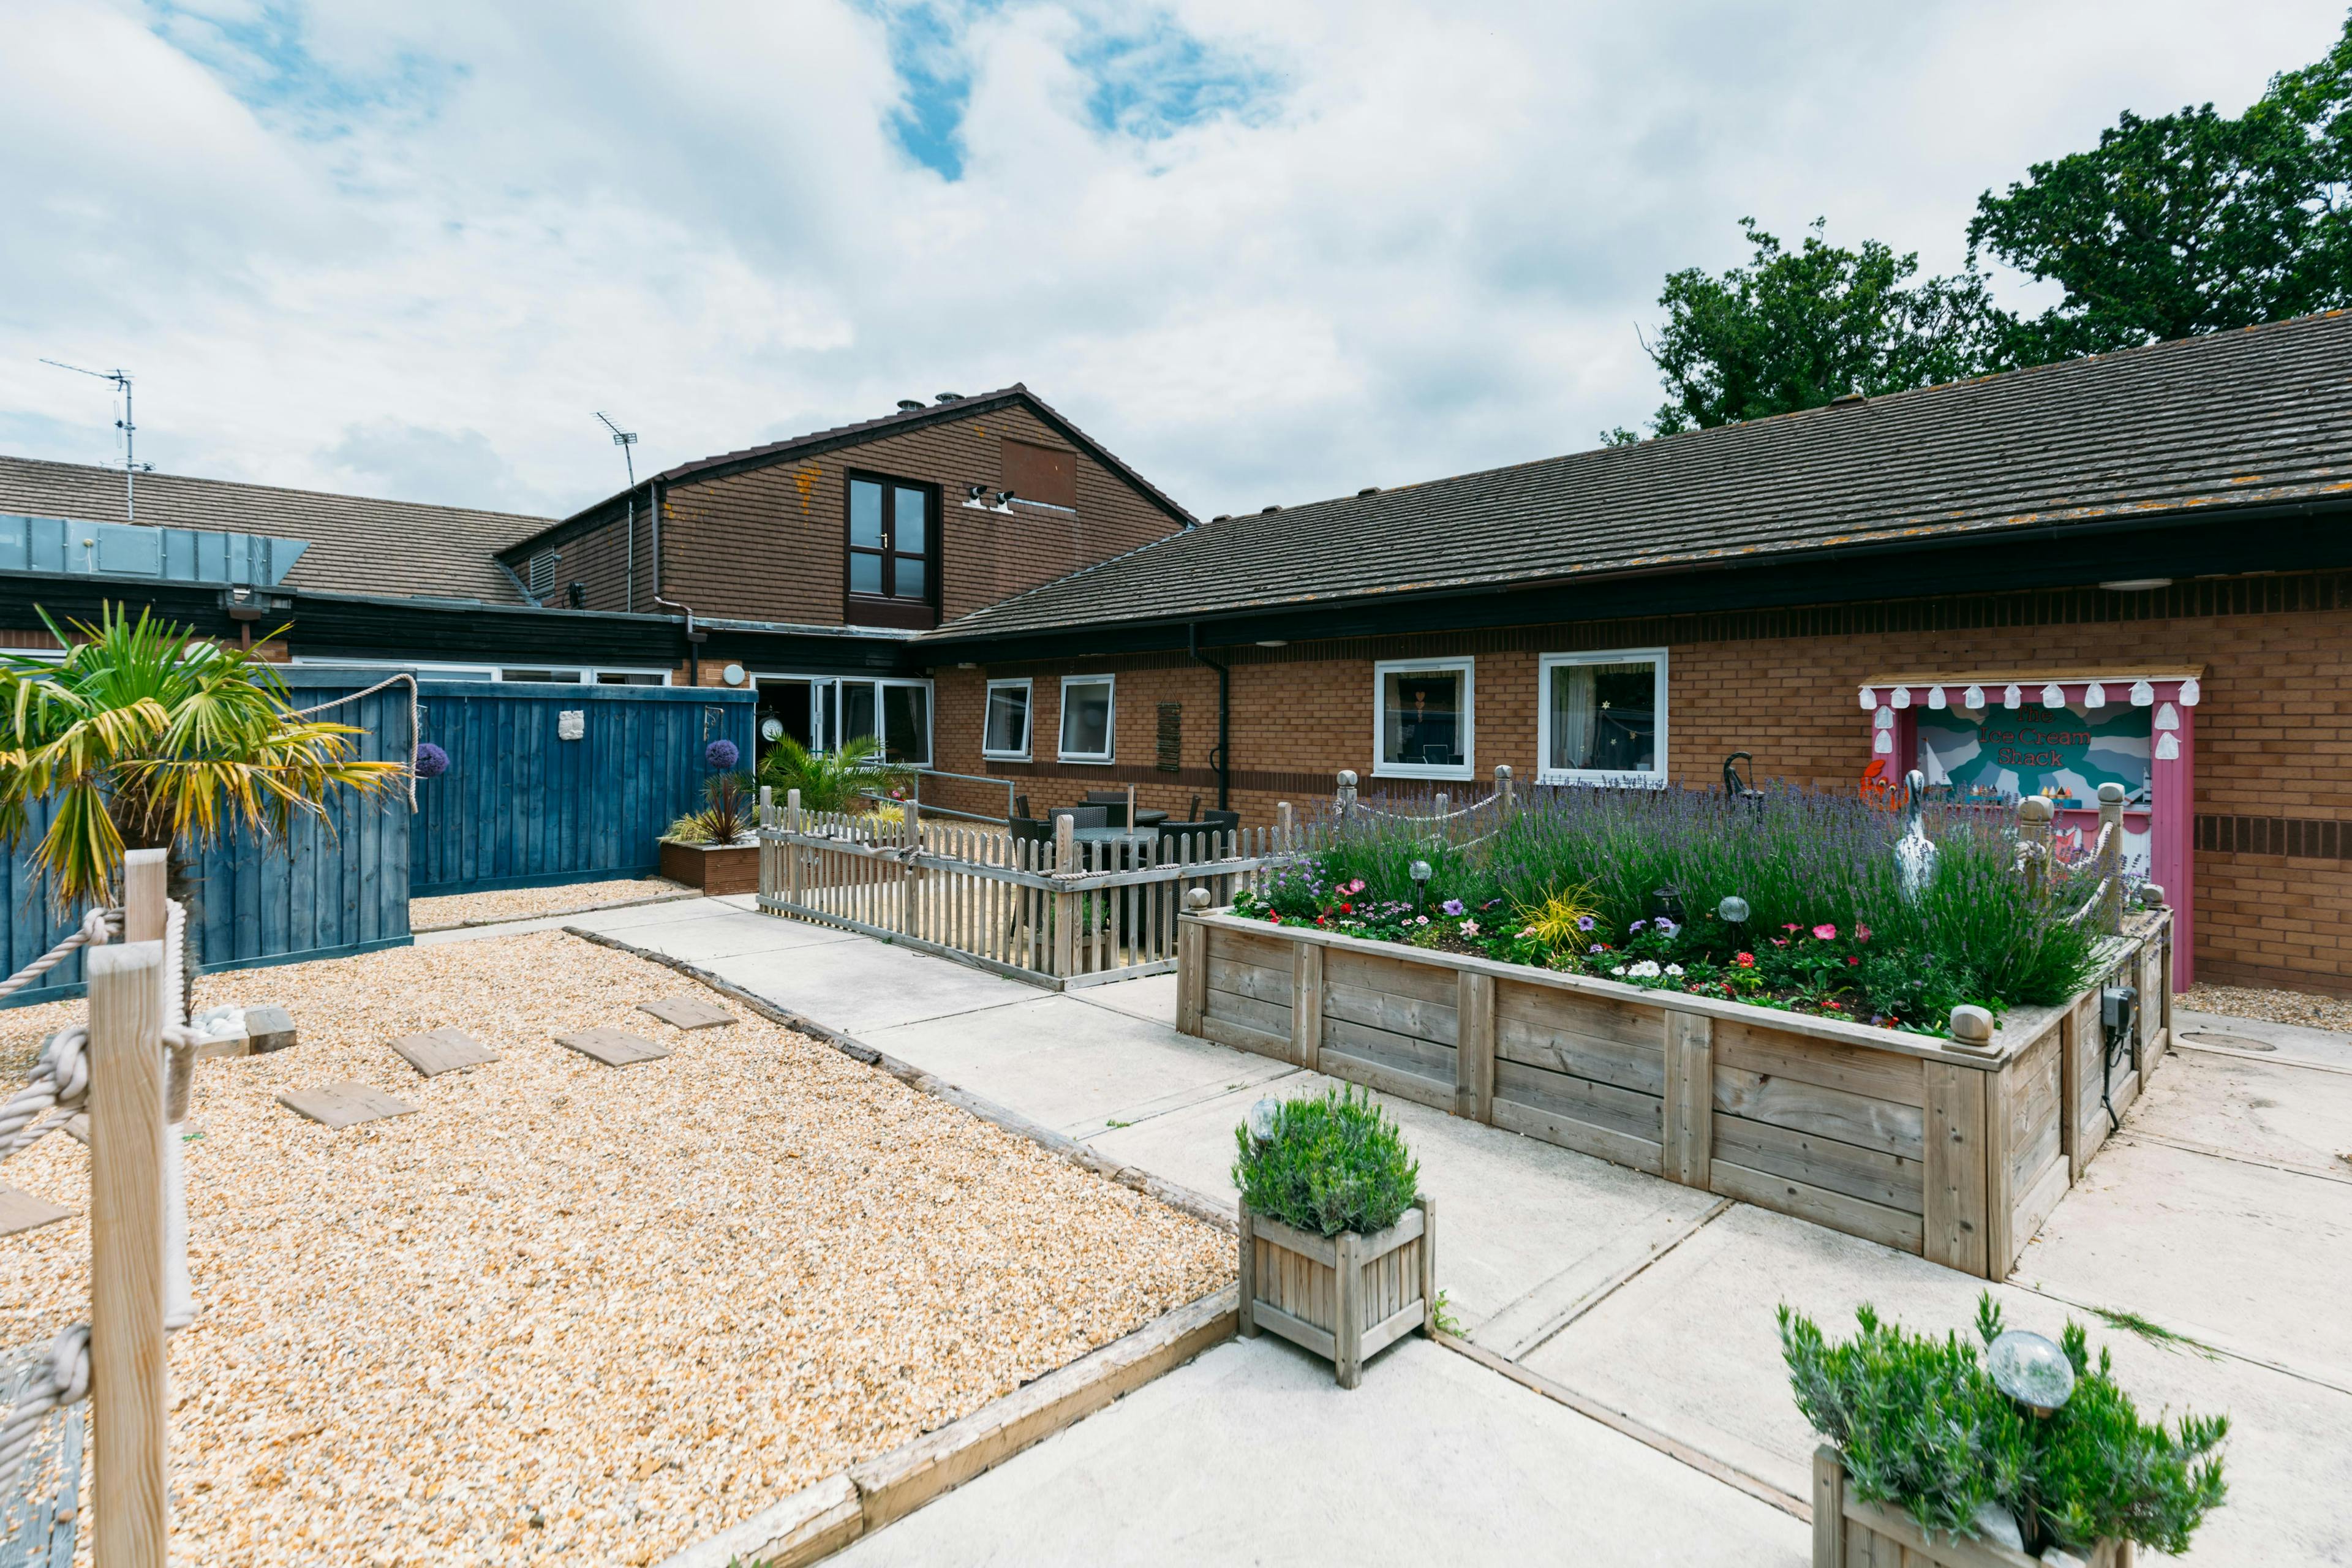 Garden at Orchard House Care Home in Newport, Isle of Wight